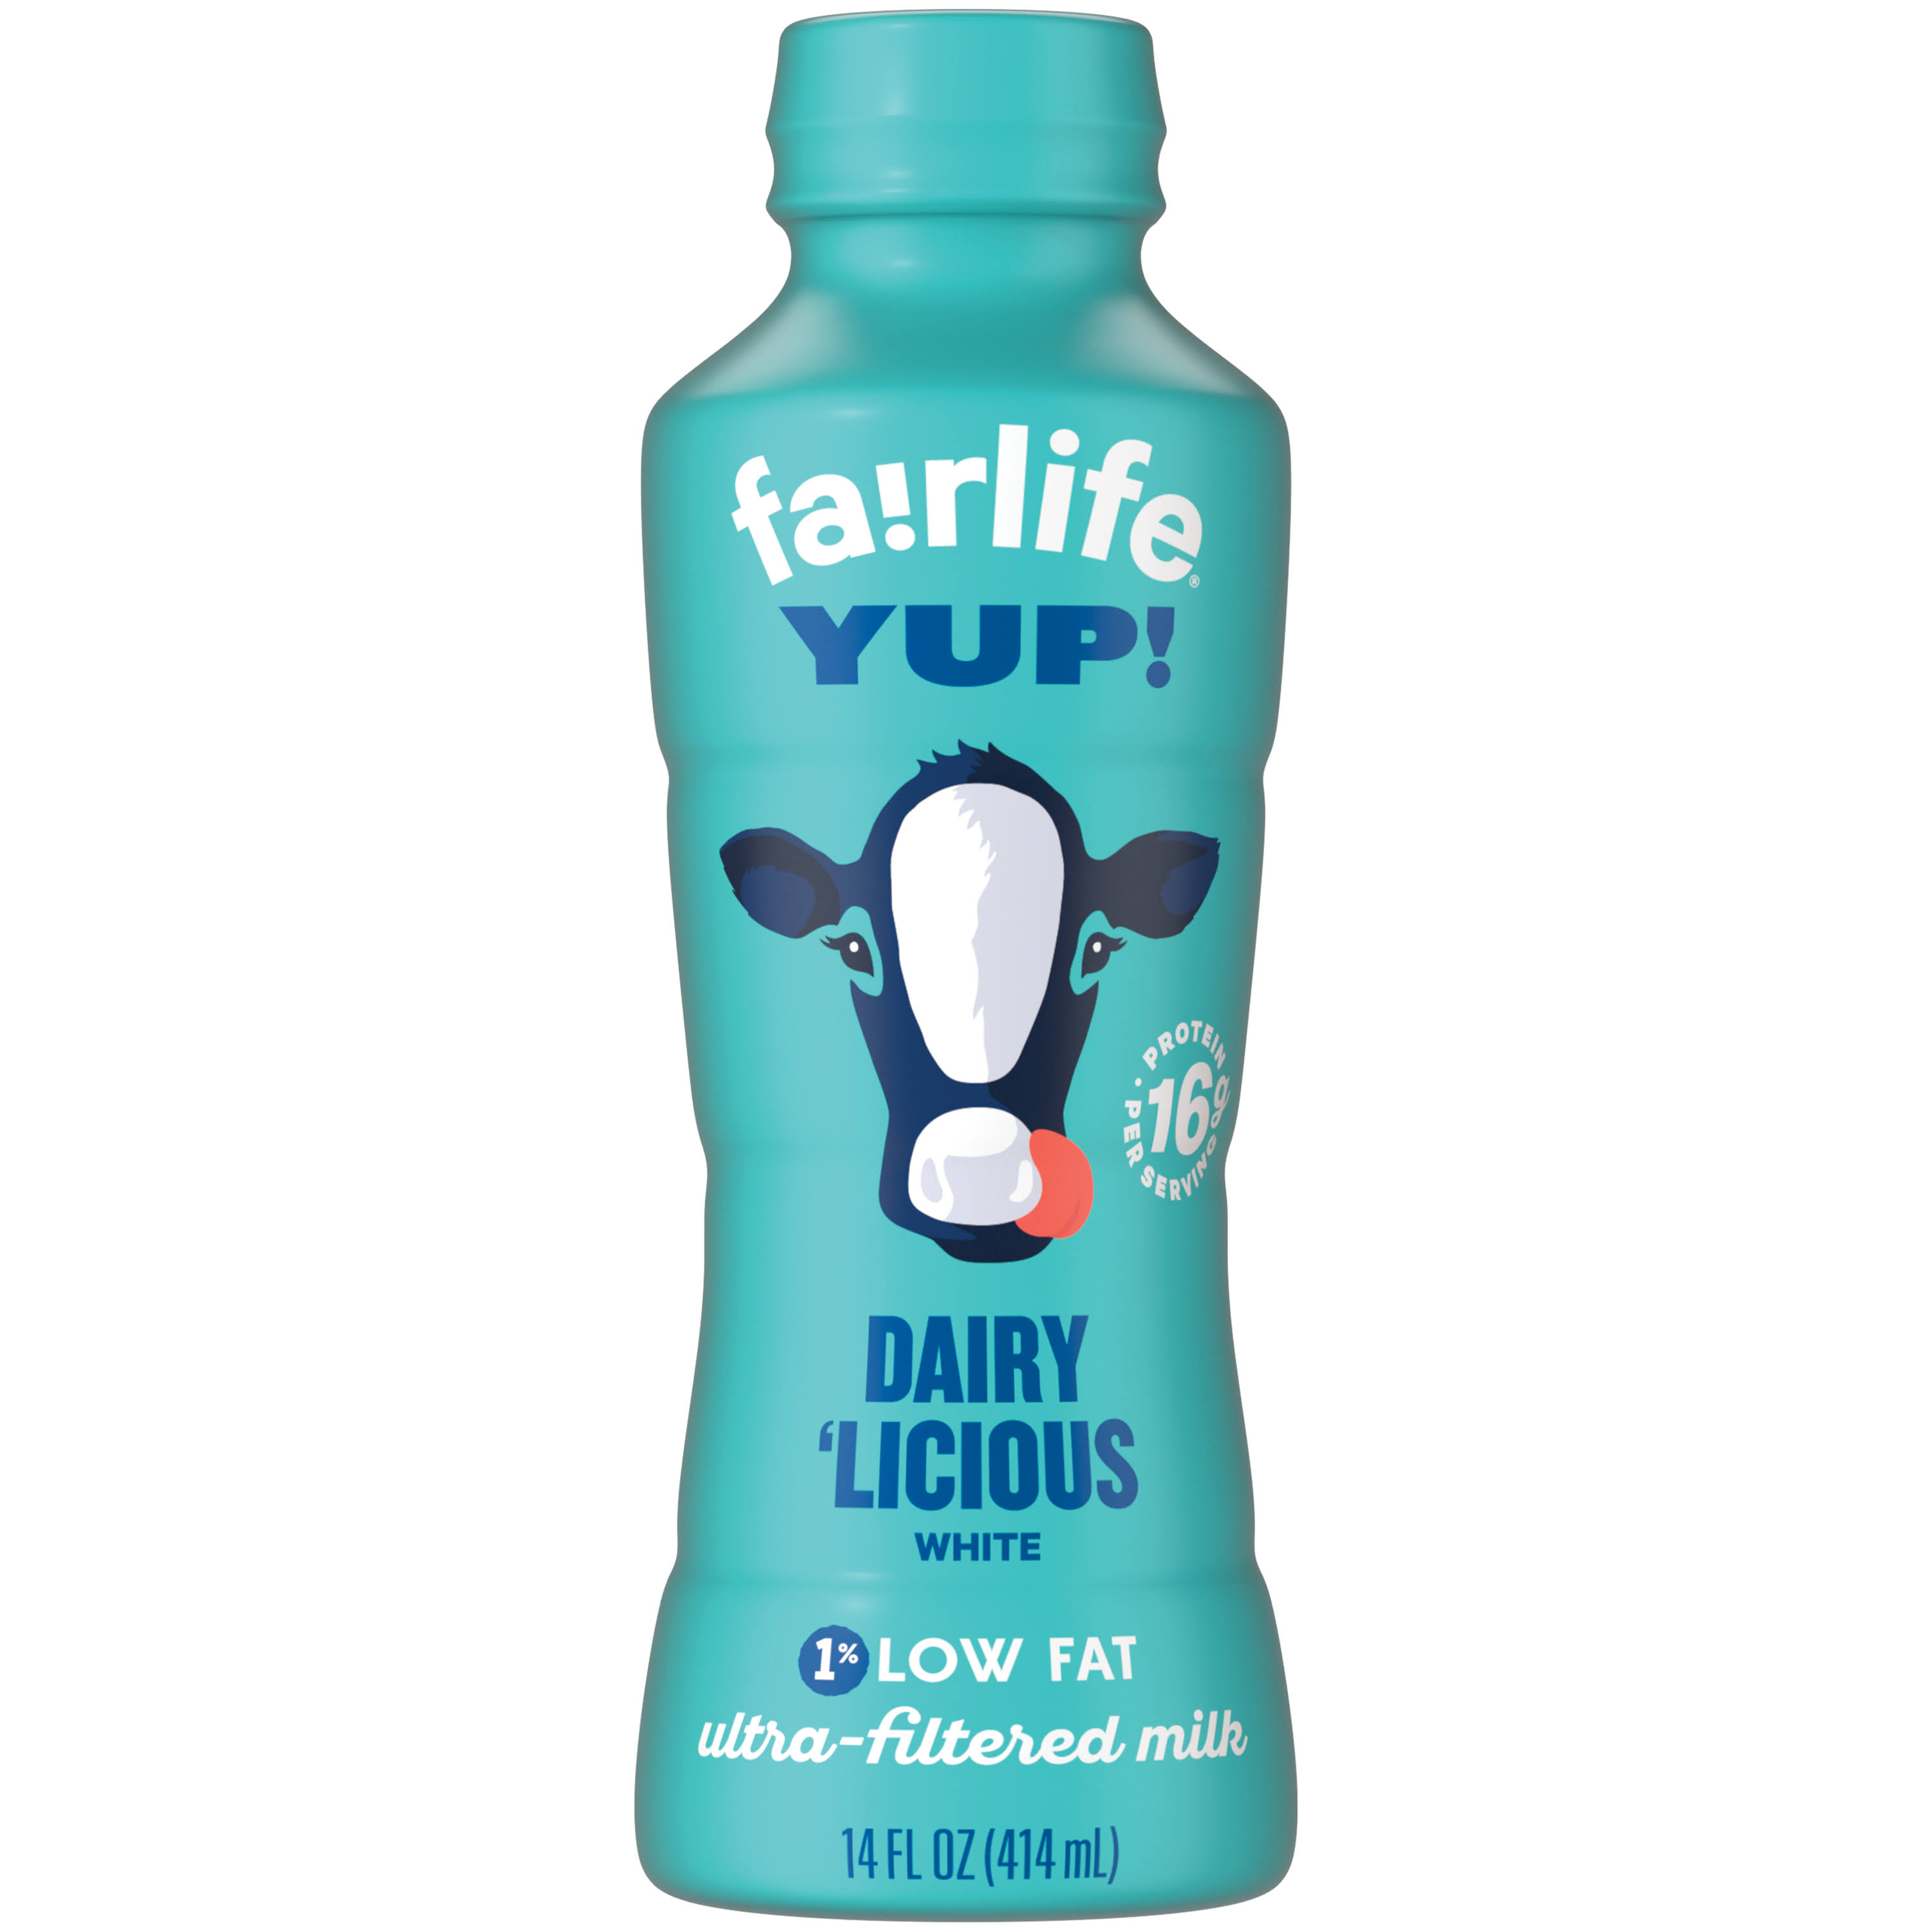 Fairlife Yup! Low Fat Ultra-Filtered Milk, Dairy Licious - 14 fl oz bottle